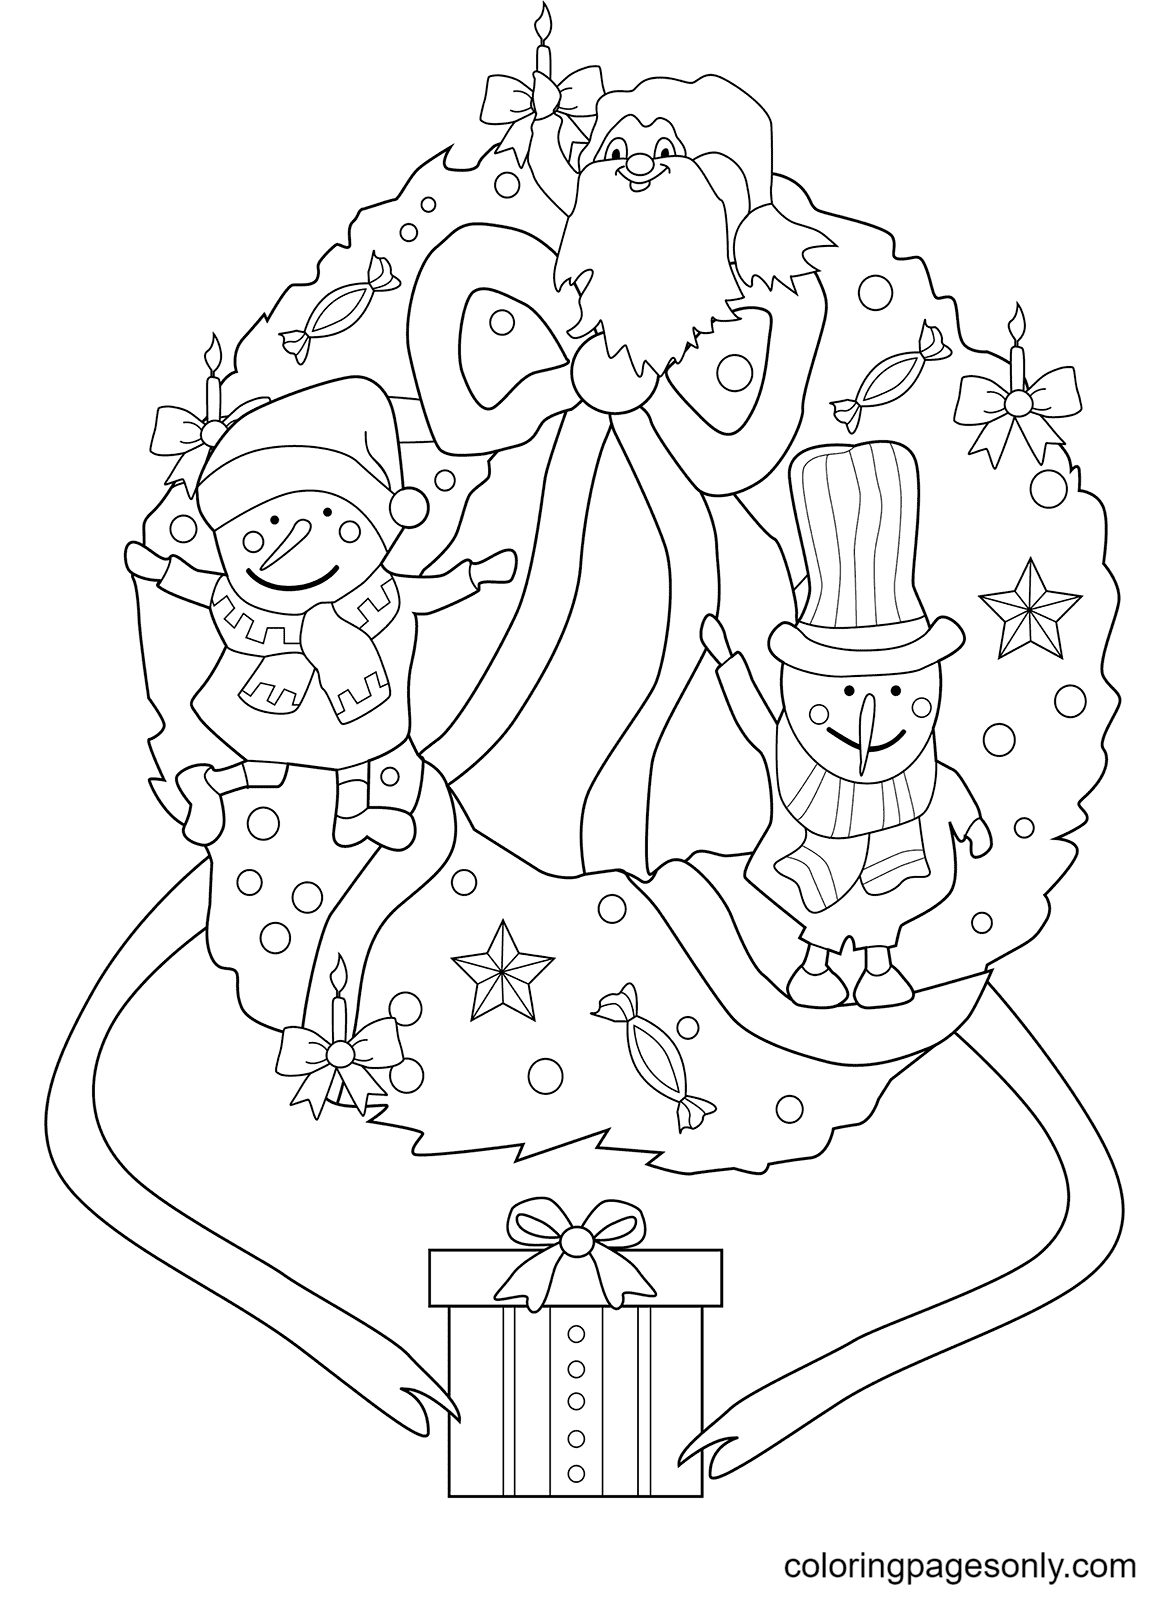 Christmas Wreath with Snowmen and Elf Coloring Page